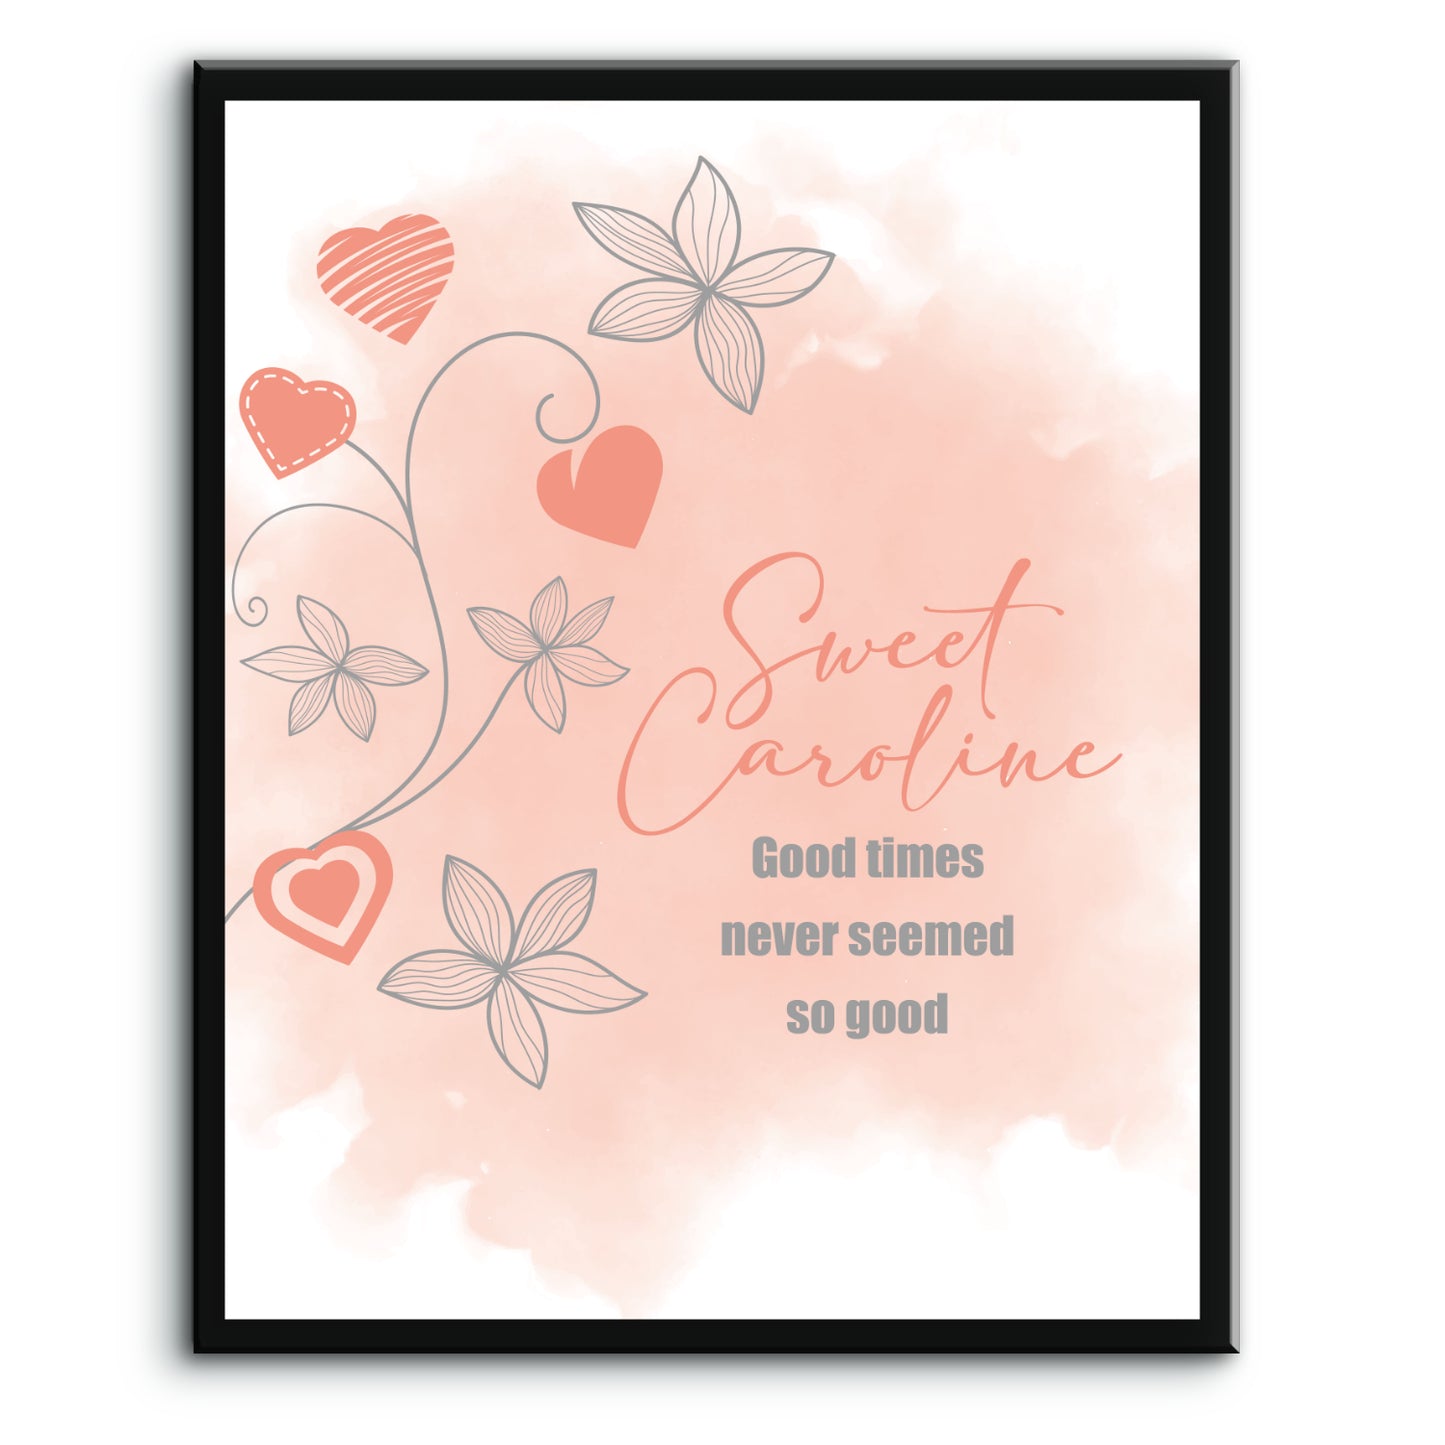 Sweet Caroline by Neil Diamond - Inspired Love Song Quote